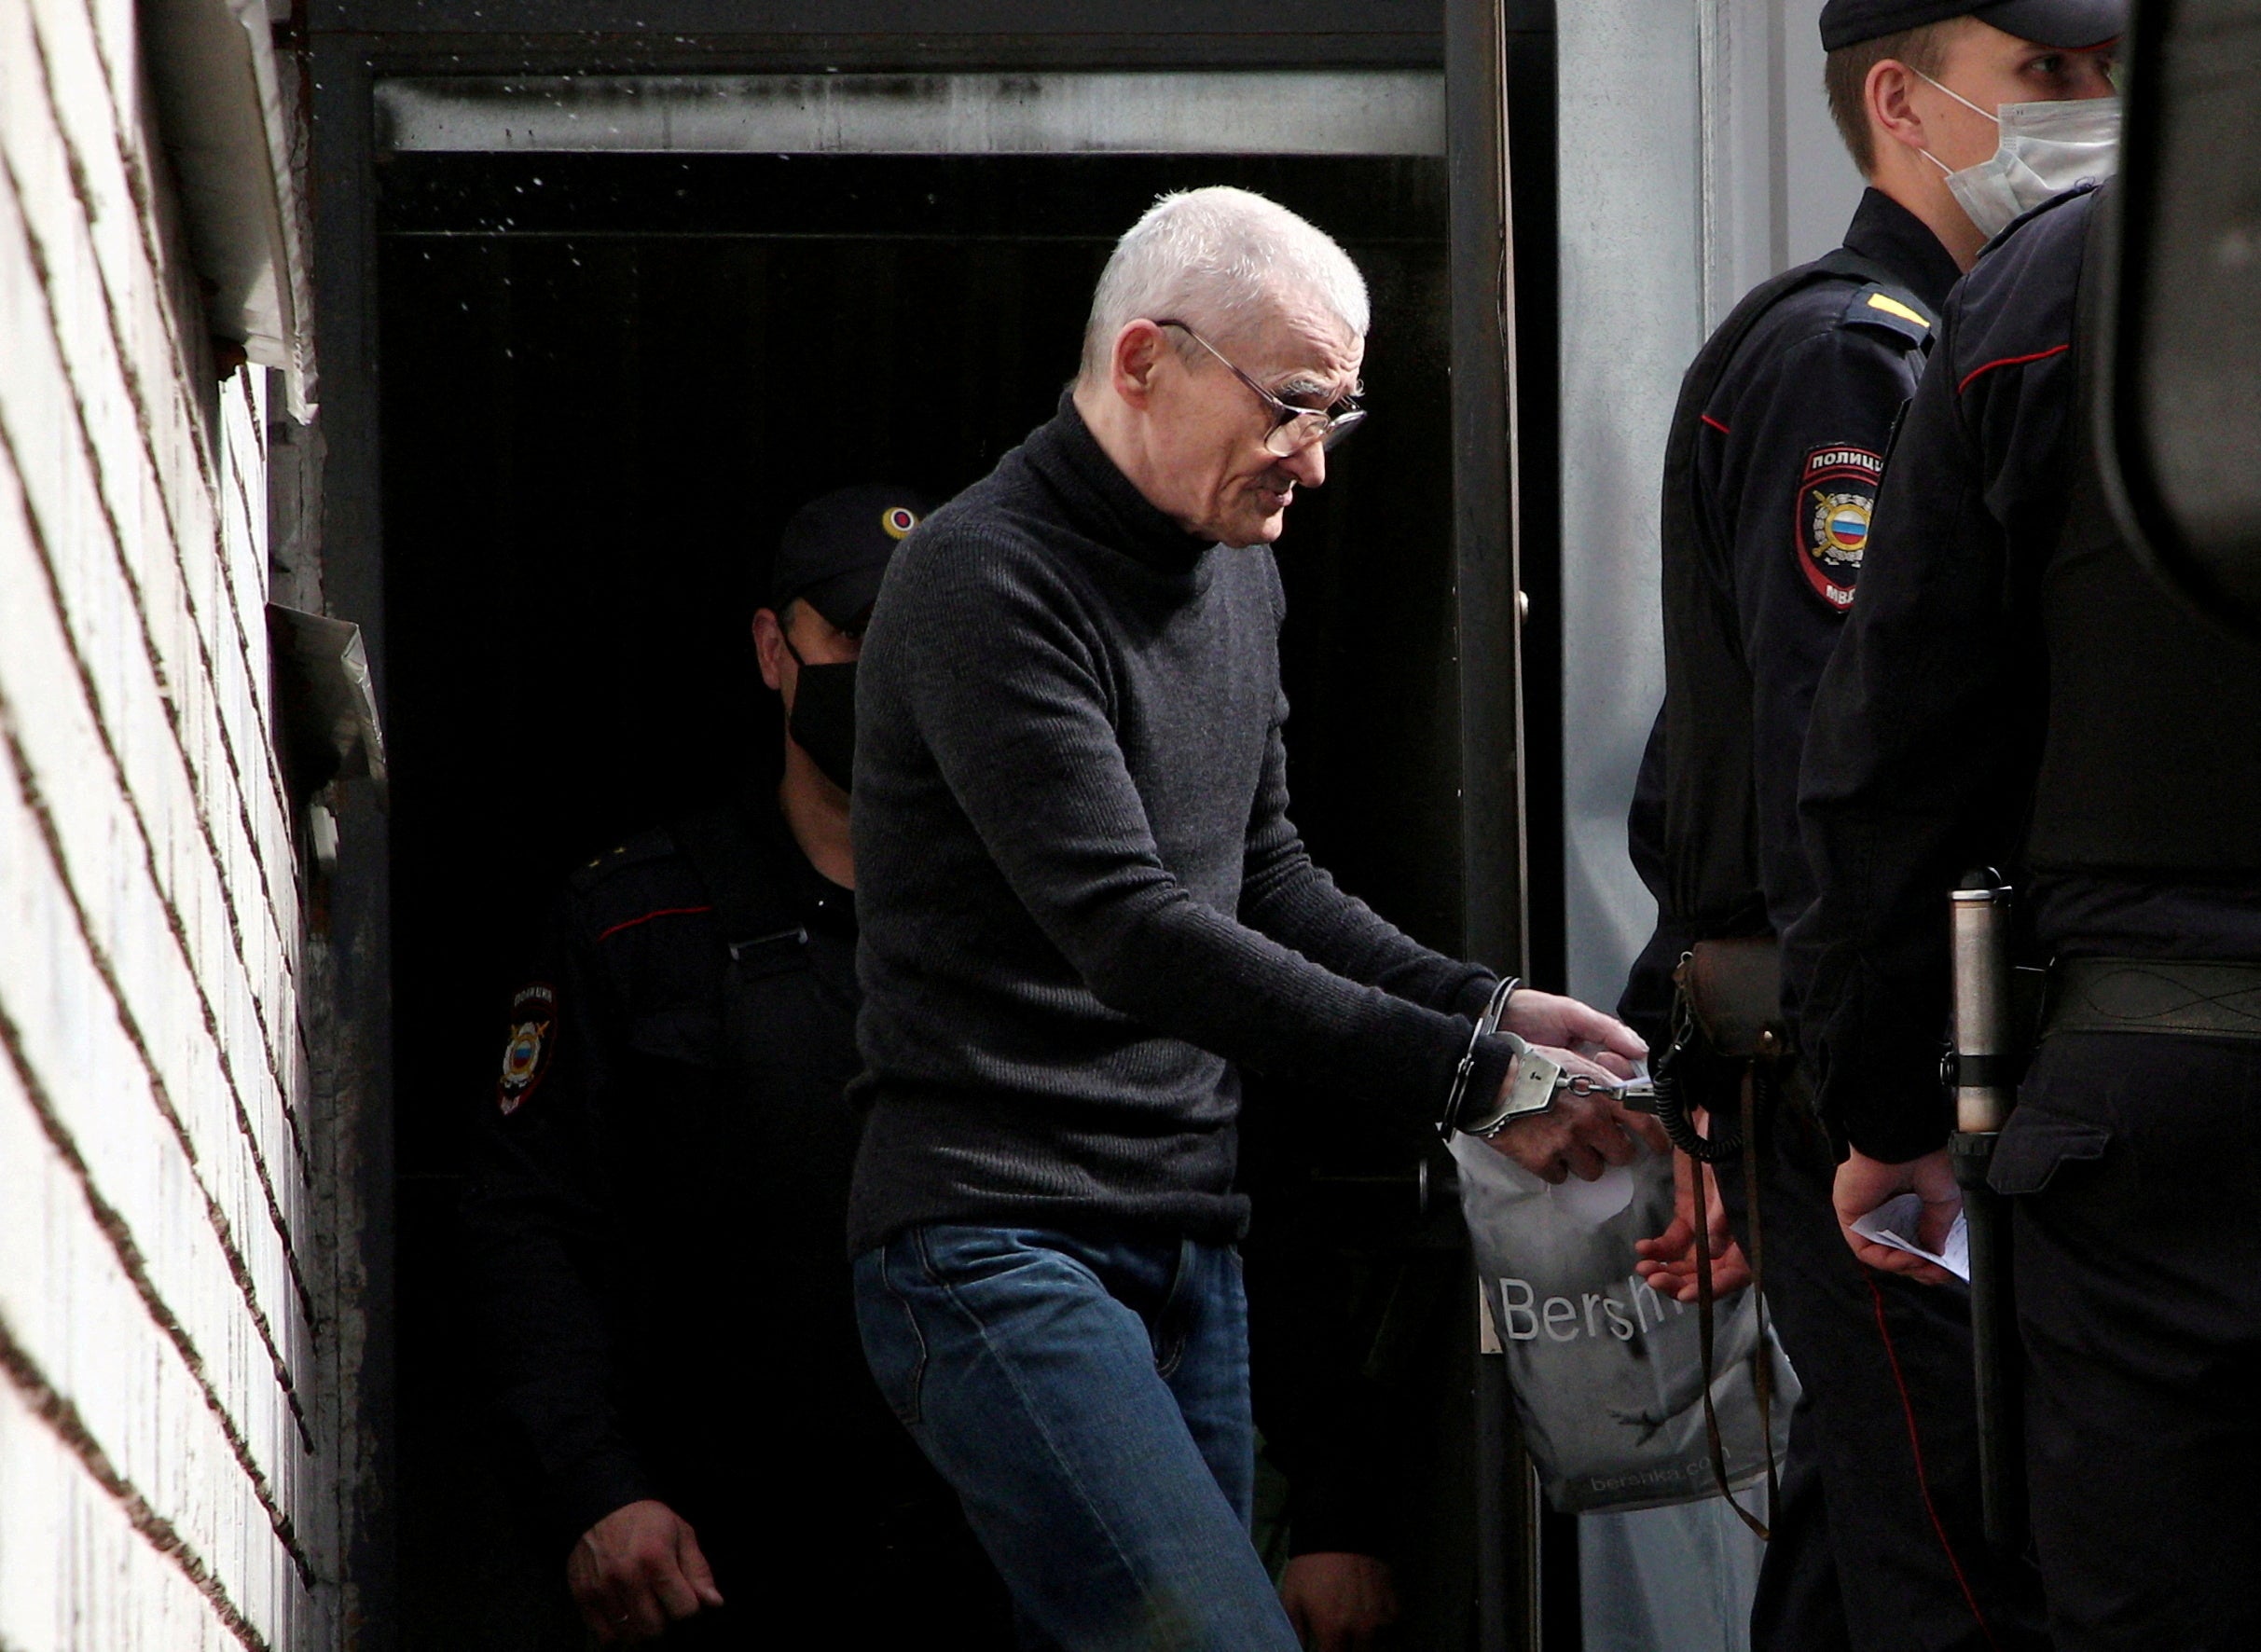 File: Russian historian Yuri Dmitriev is escorted by police officers after a court hearing in Petrozavodsk